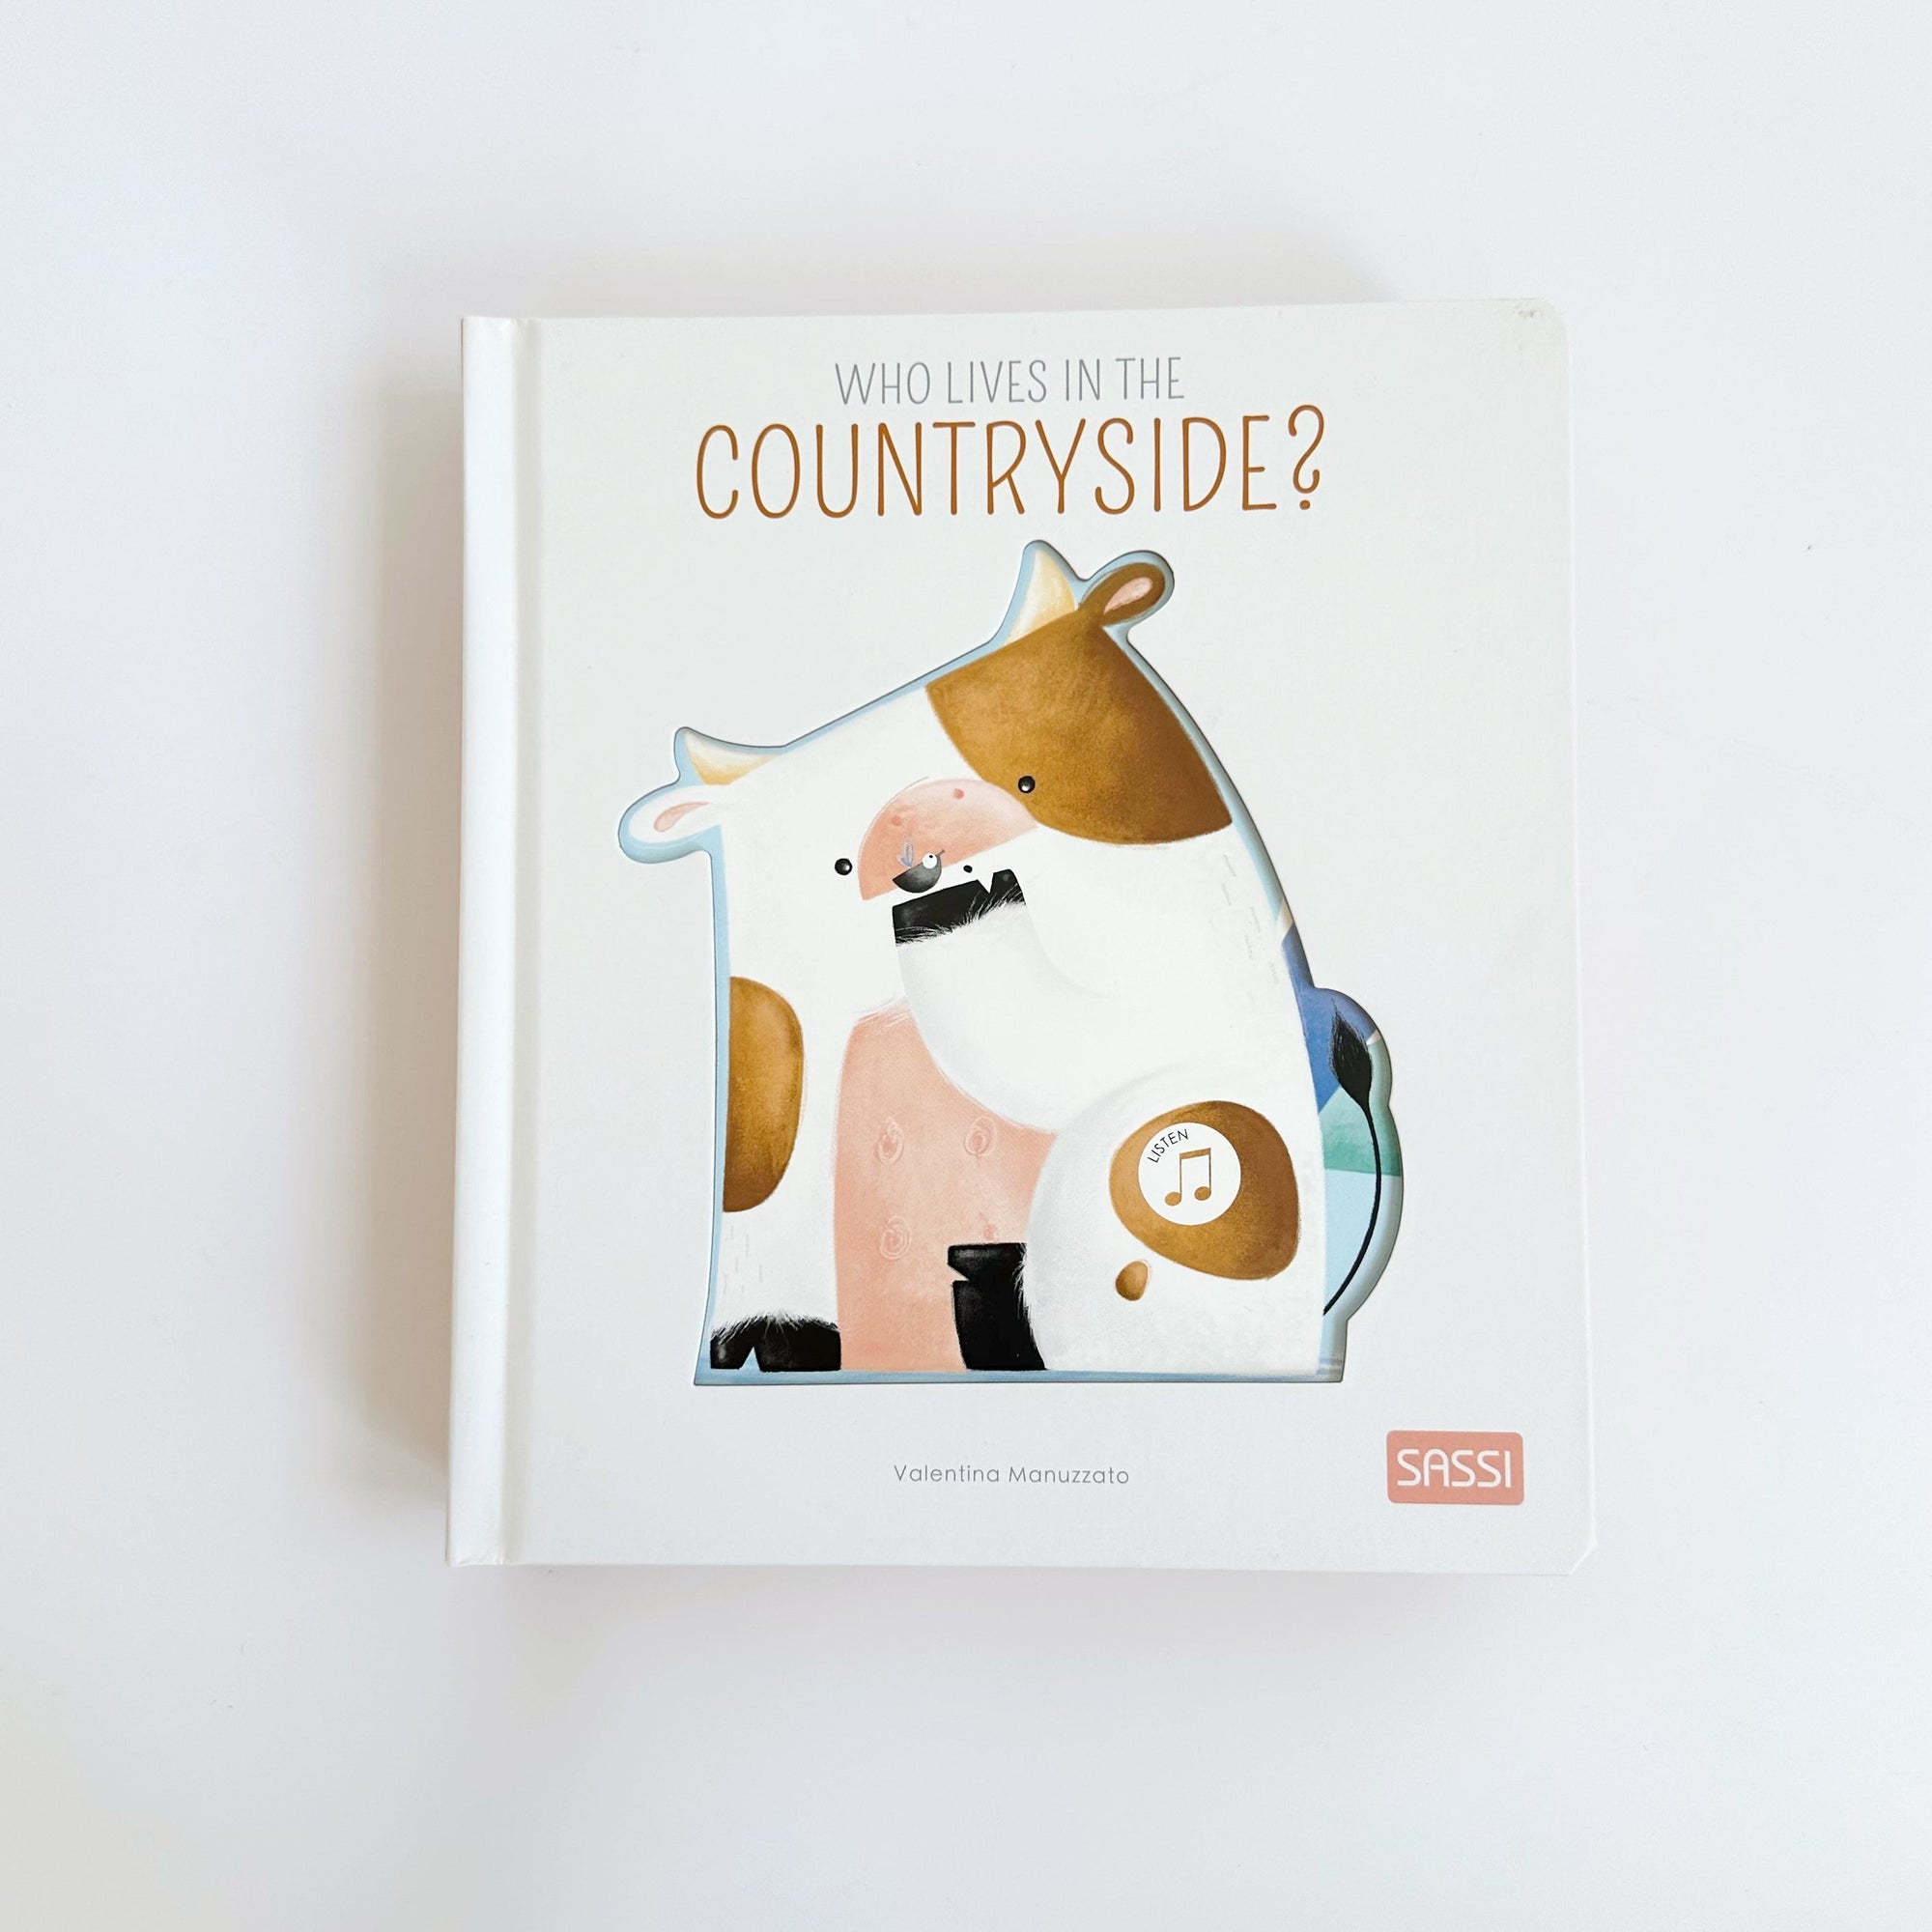 SASSI SOUND BOOK: WHO LIVES IN THE COUNTRYSIDE